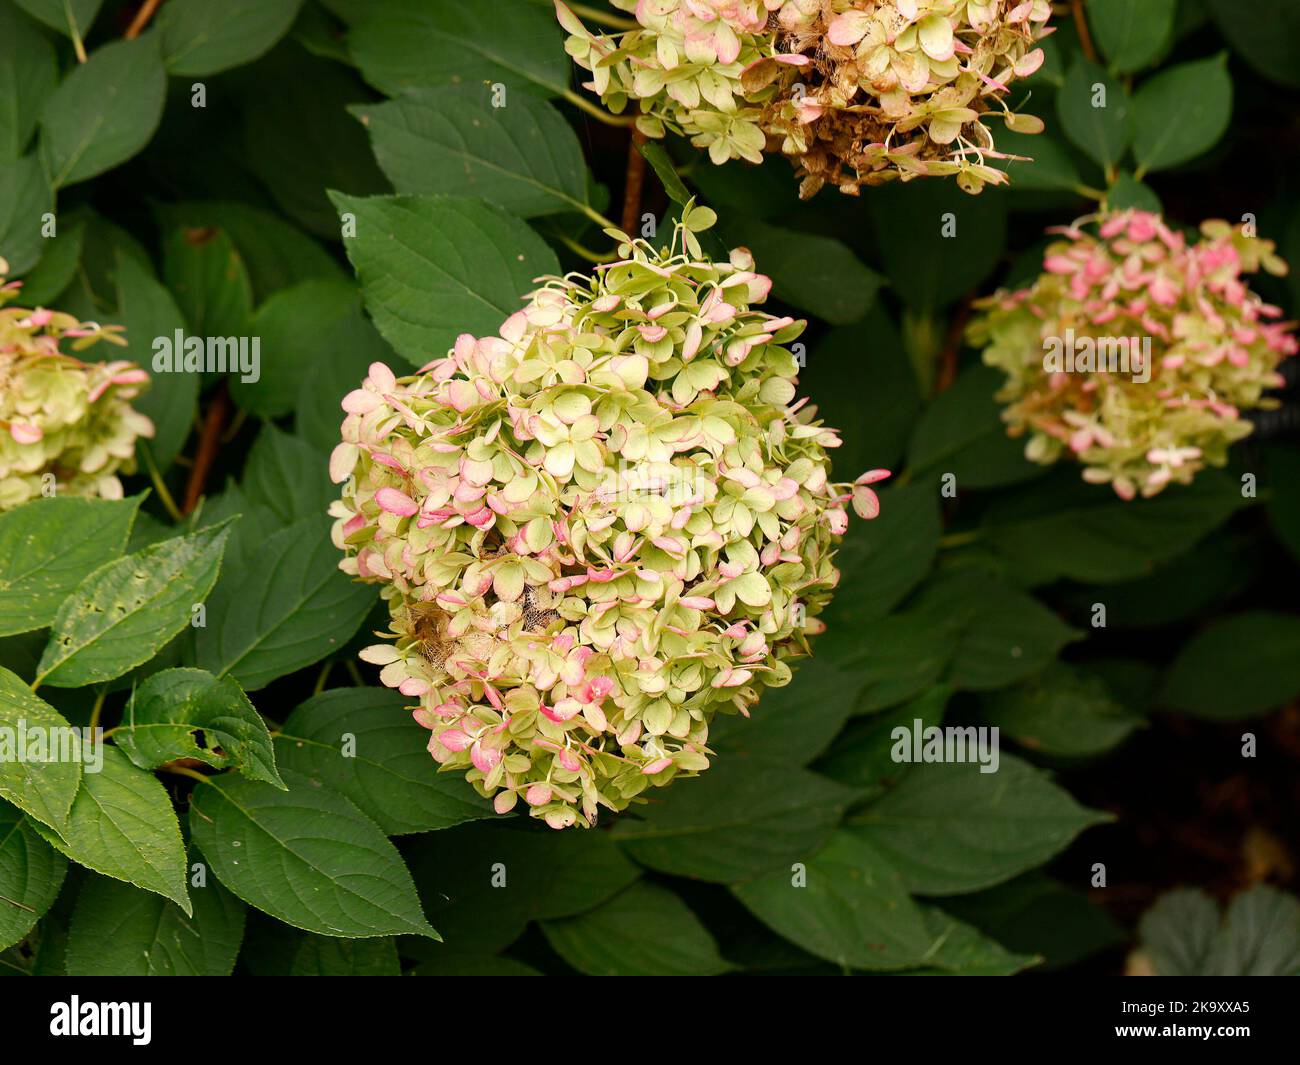 Close up of the rose white conical shaped flower of the deciduous perennial garden plant Hydrangea paniculata Limelight seen in autumn. Stock Photo